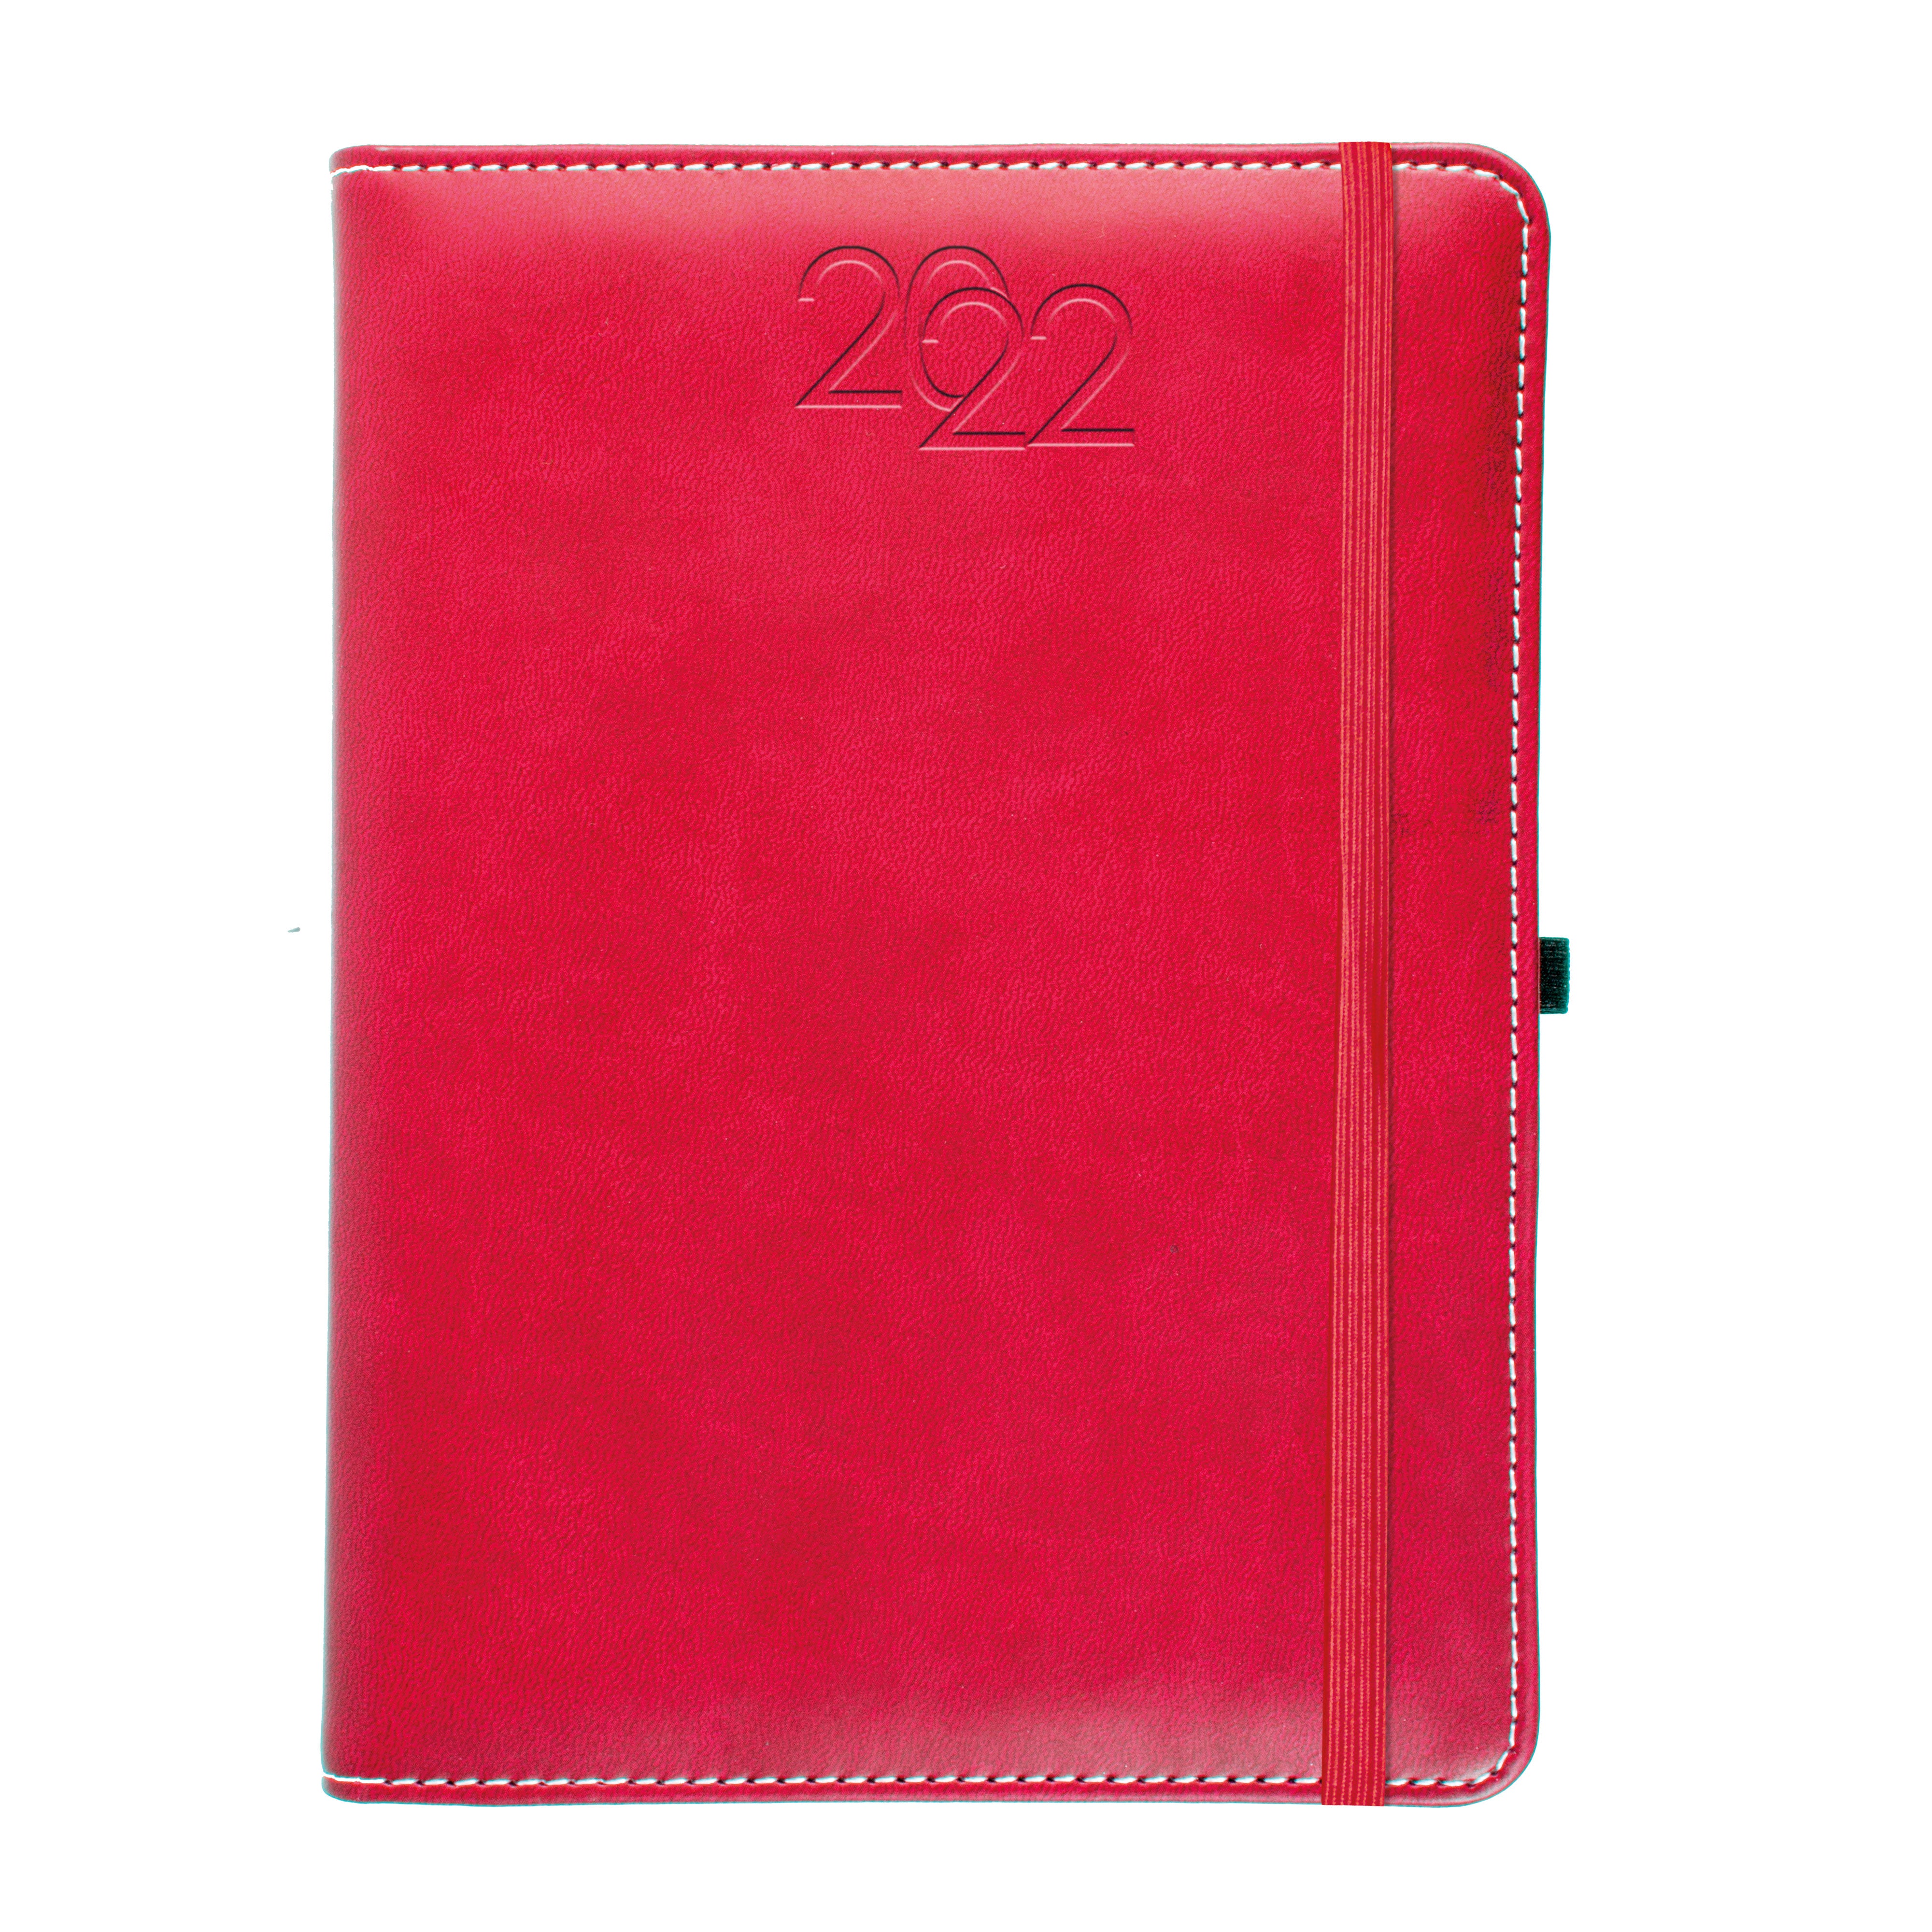 Diary A5 Size 2022